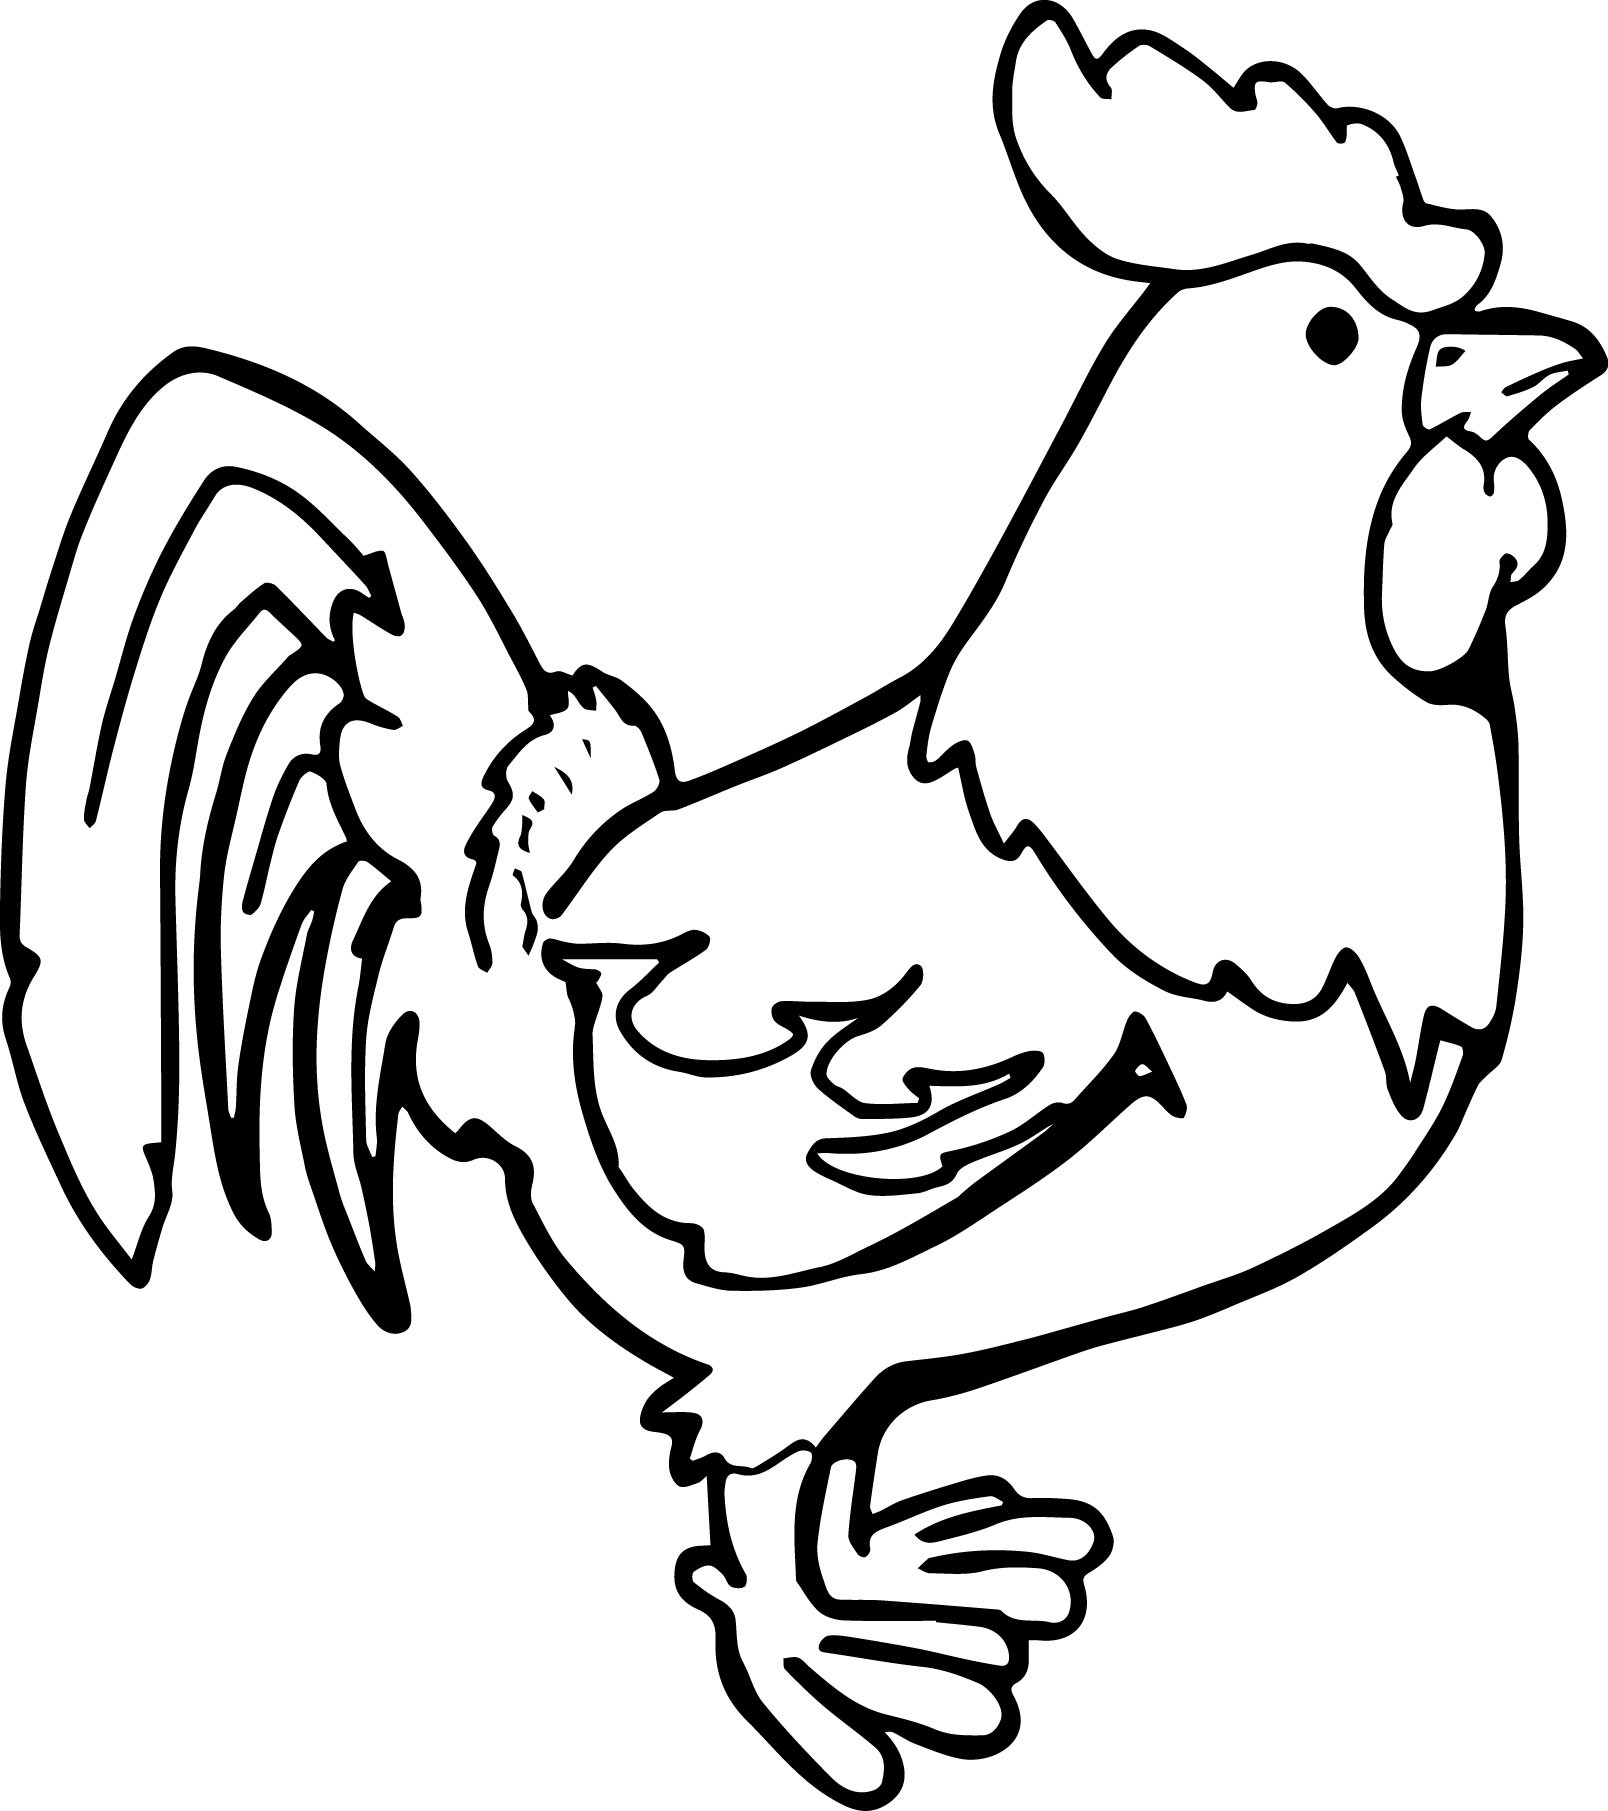 Free Coloring Pages For Boys Chicken Nuggets
 Chicken Nug s Pages Coloring Pages